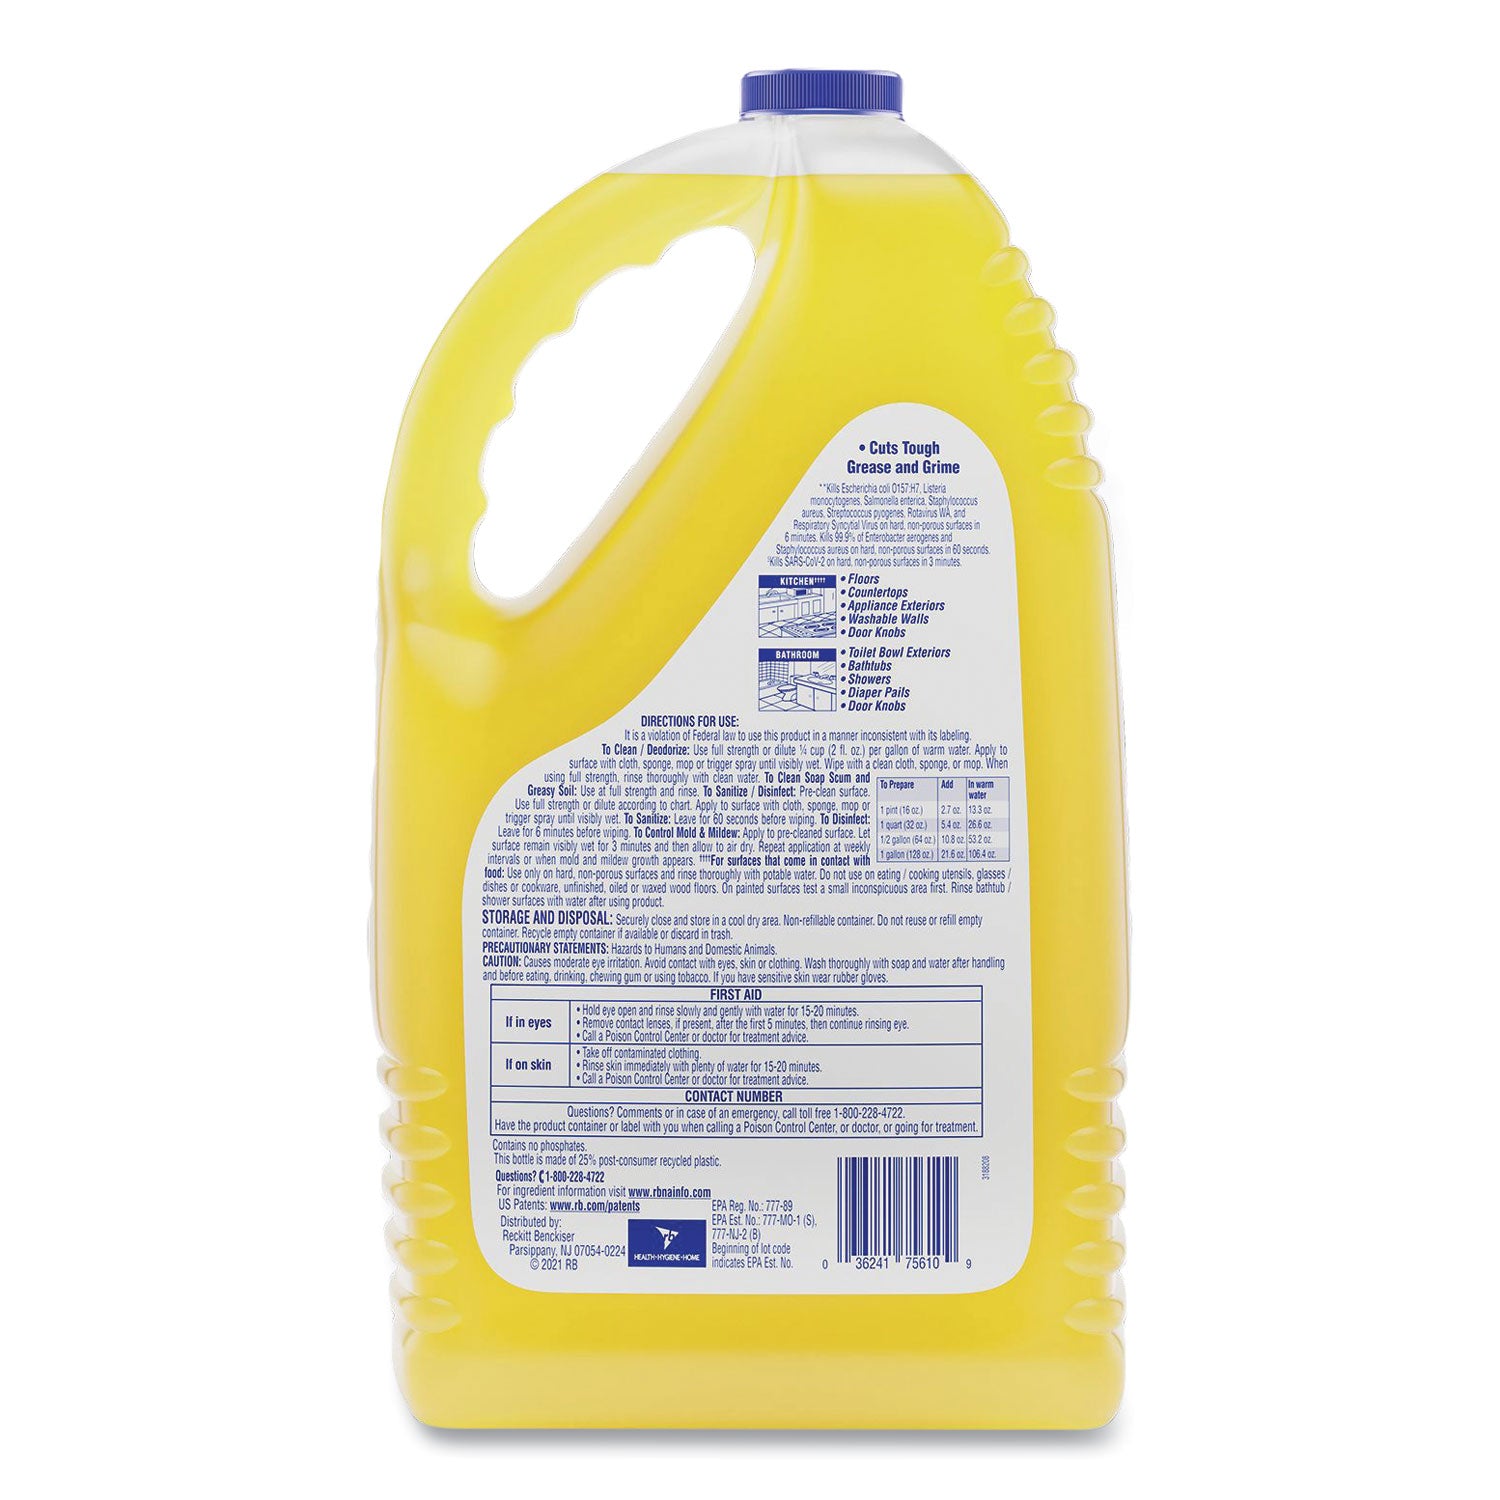 clean-and-fresh-multi-surface-cleaner-sparkling-lemon-and-sunflower-essence-144-oz-bottle-4-carton_rac77617 - 3